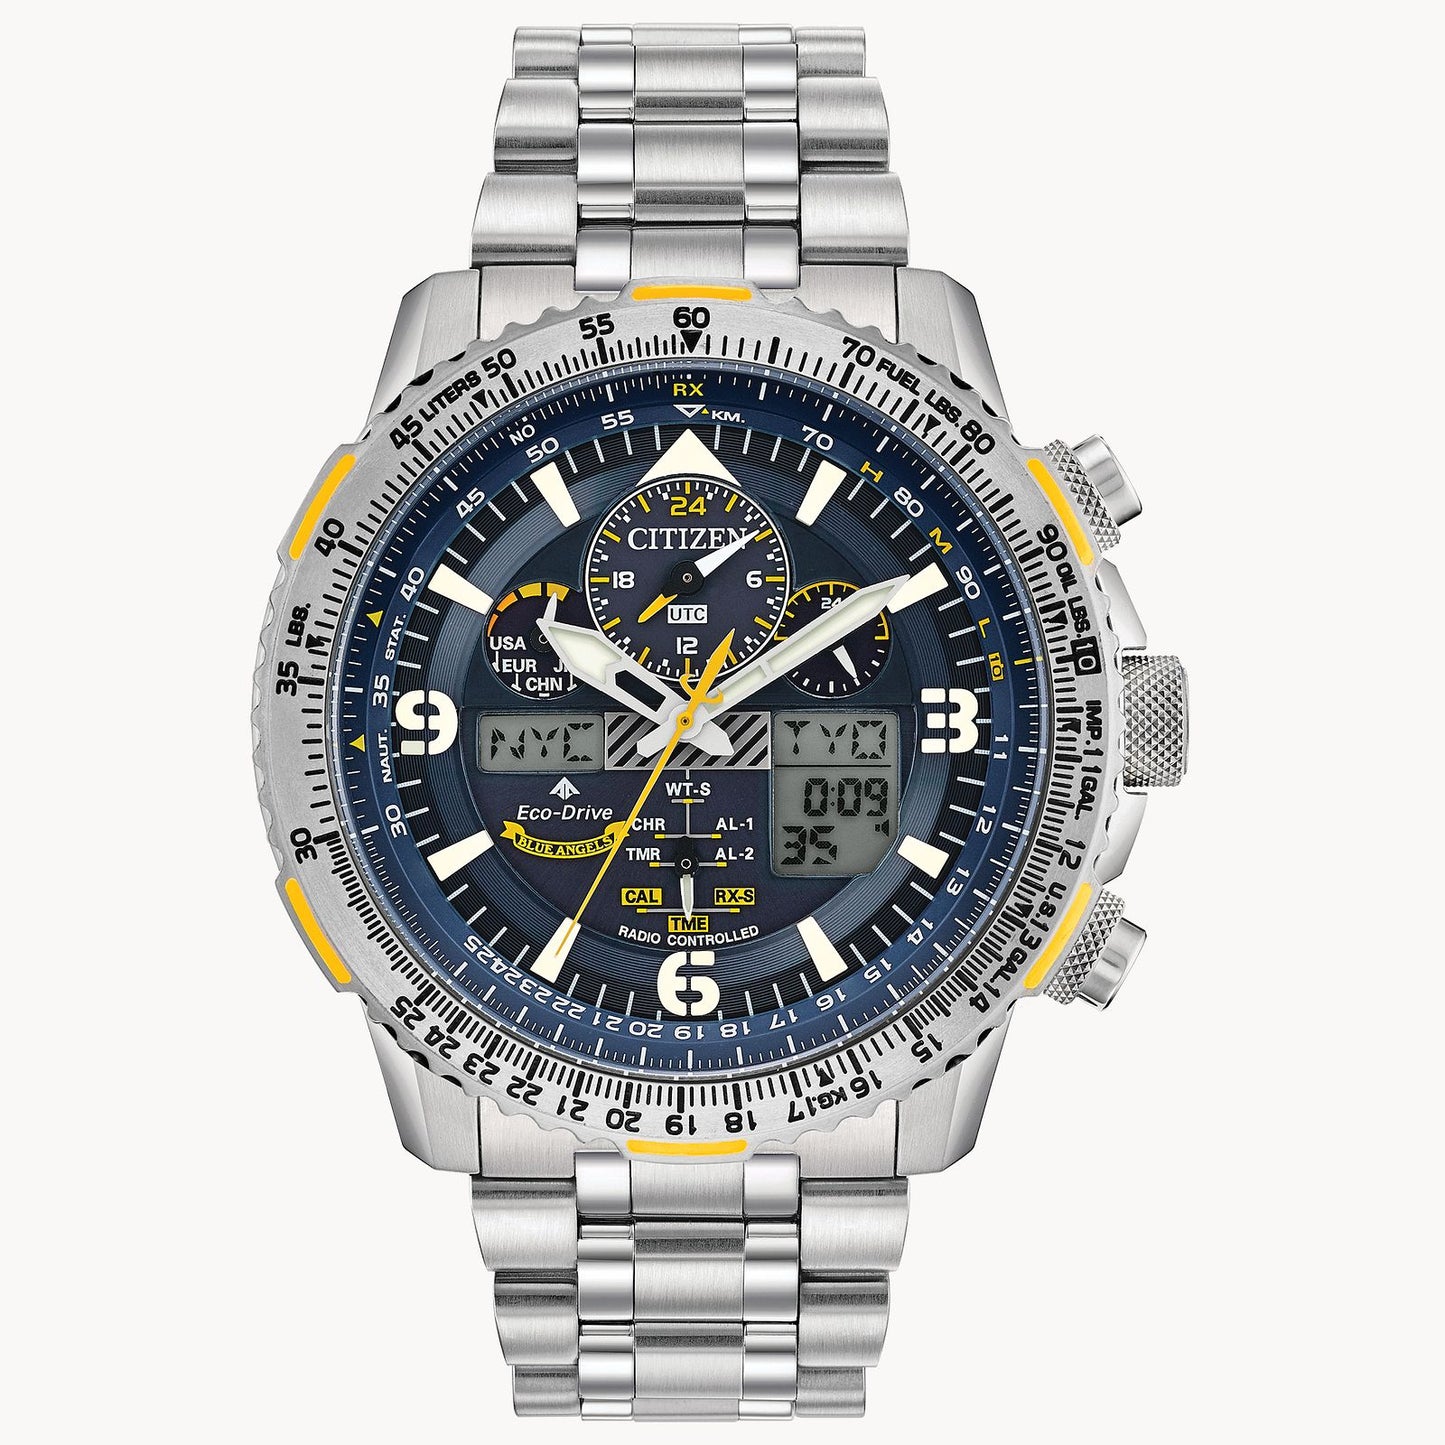 Load image into Gallery viewer, Promaster Skyhawk A-T Premium Citizen Watch JY8101-52L
